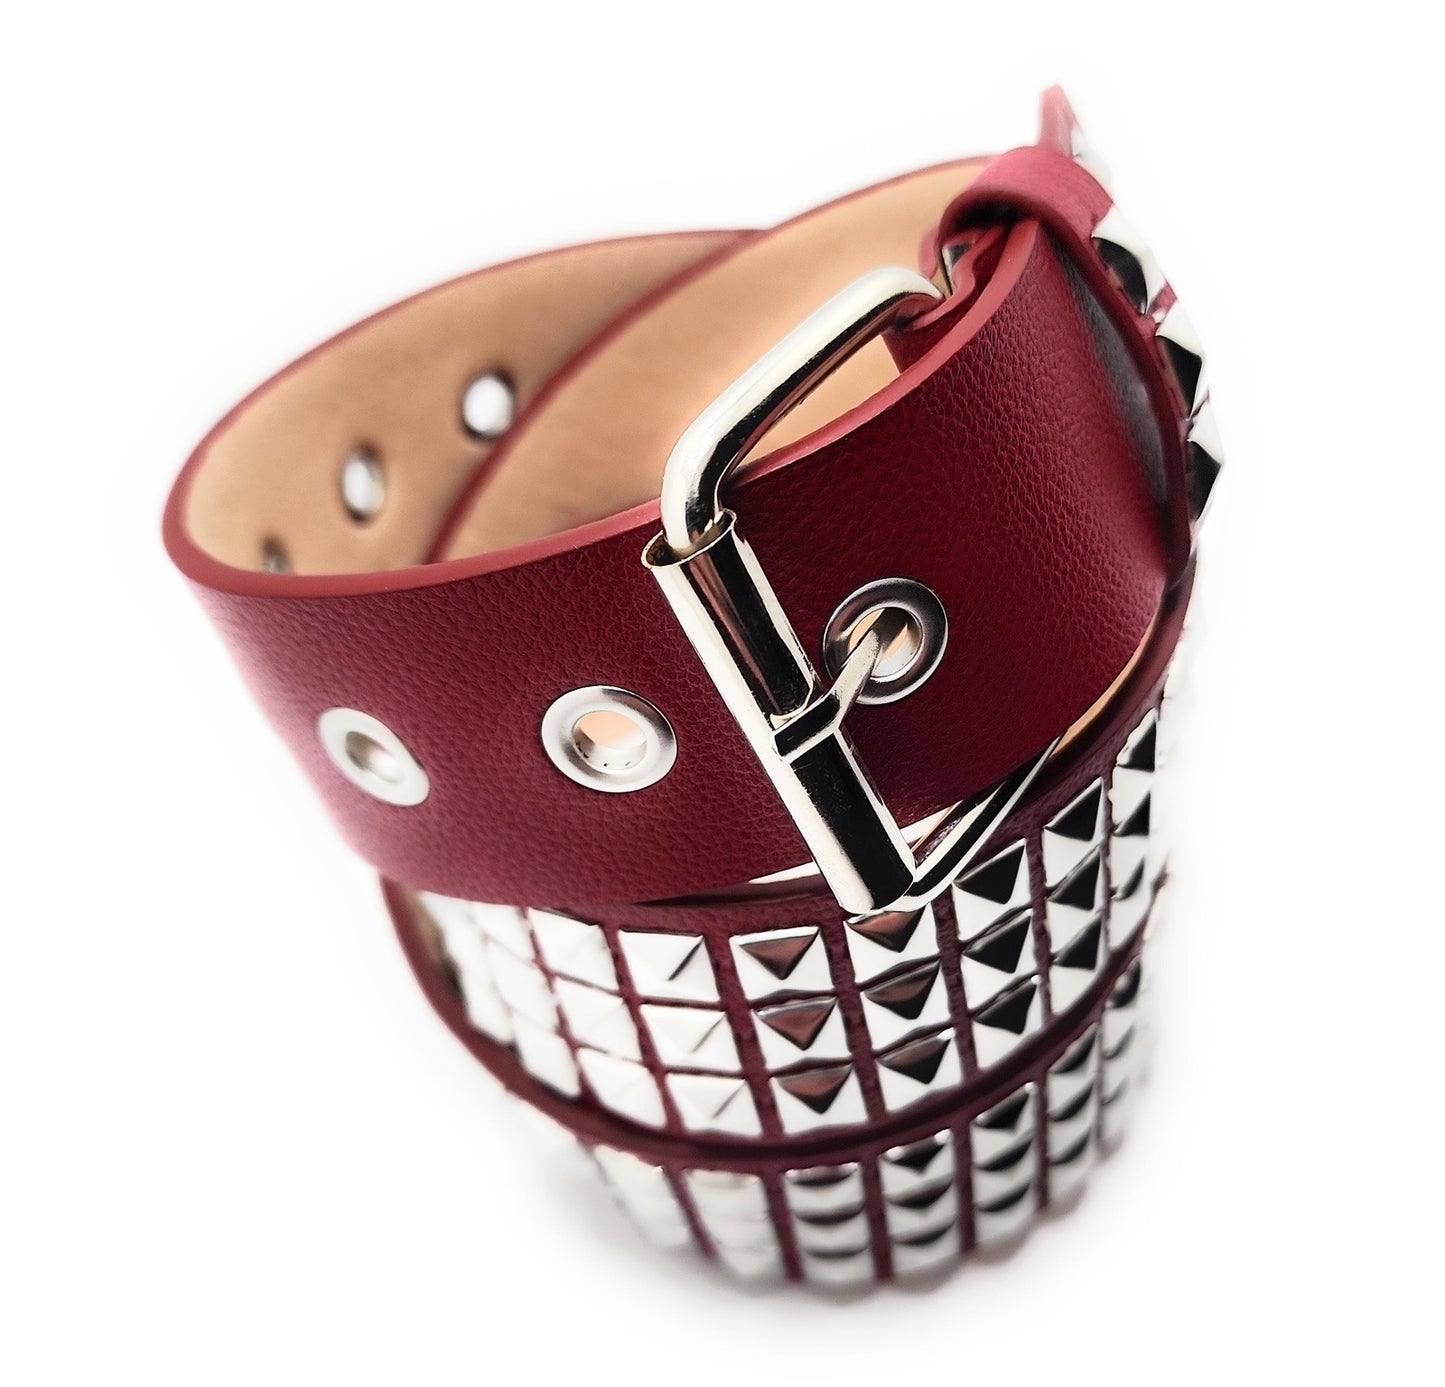 Silver on Dark Red Studded Belt Trim-to-Fit